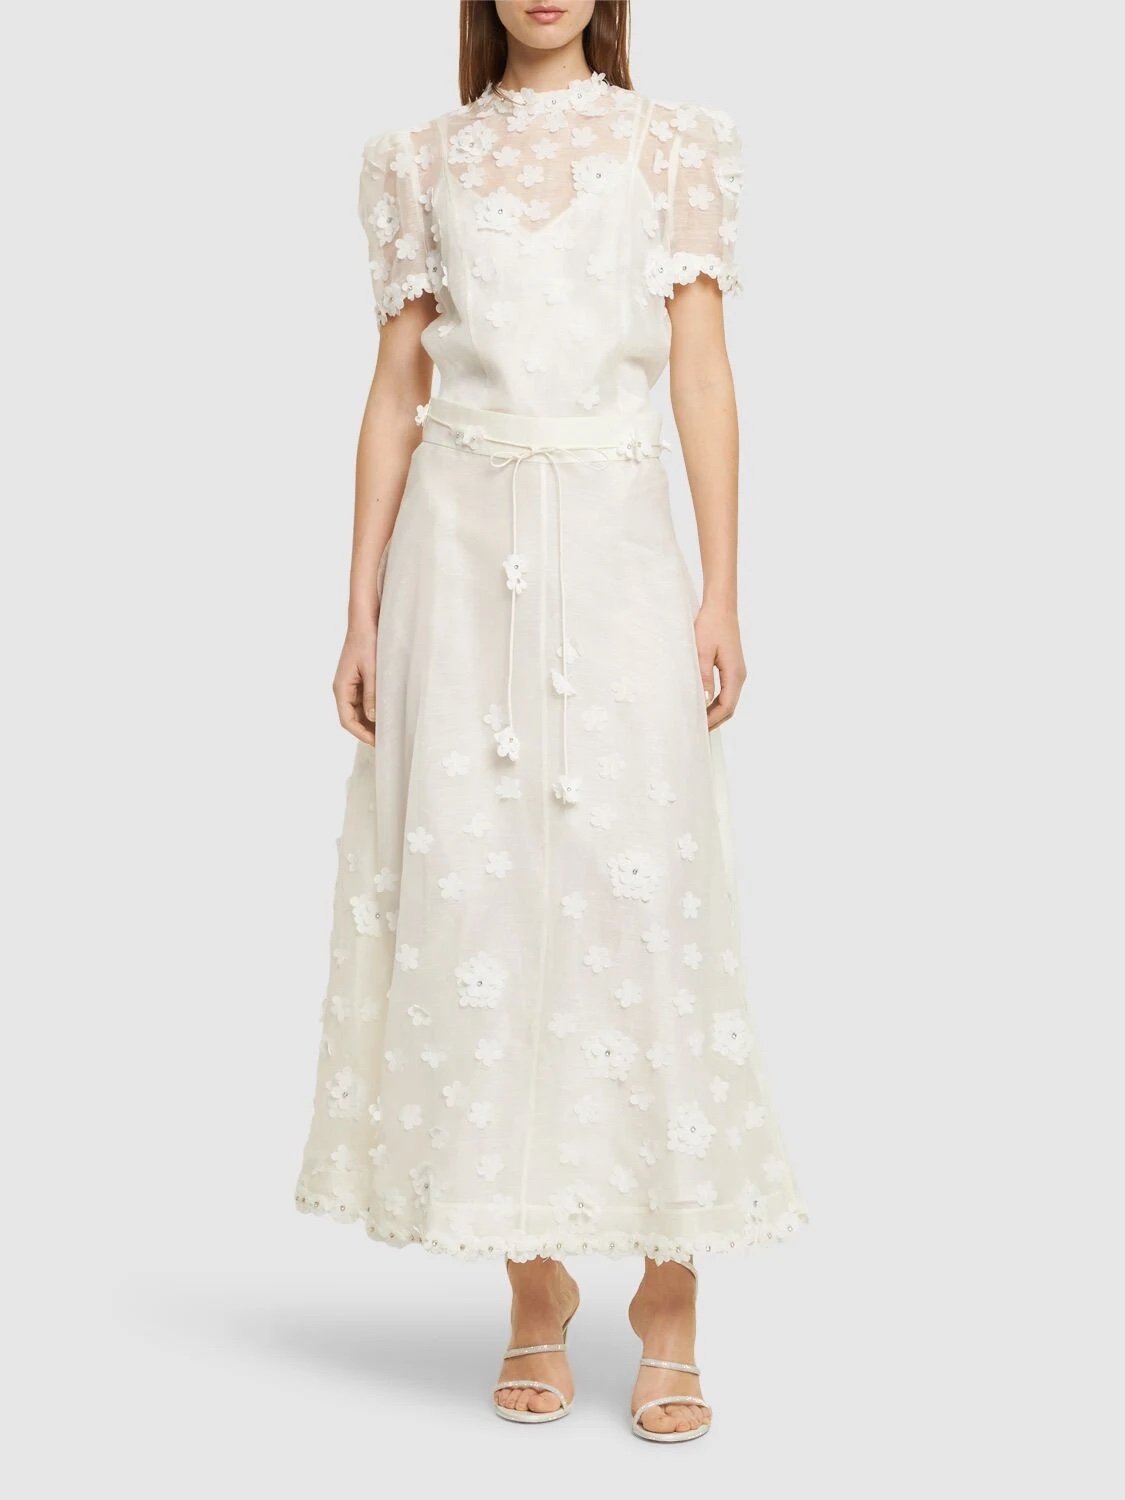 Zimmermann Clothing Shirts & Blouses Skirts Spring/Summer Collection